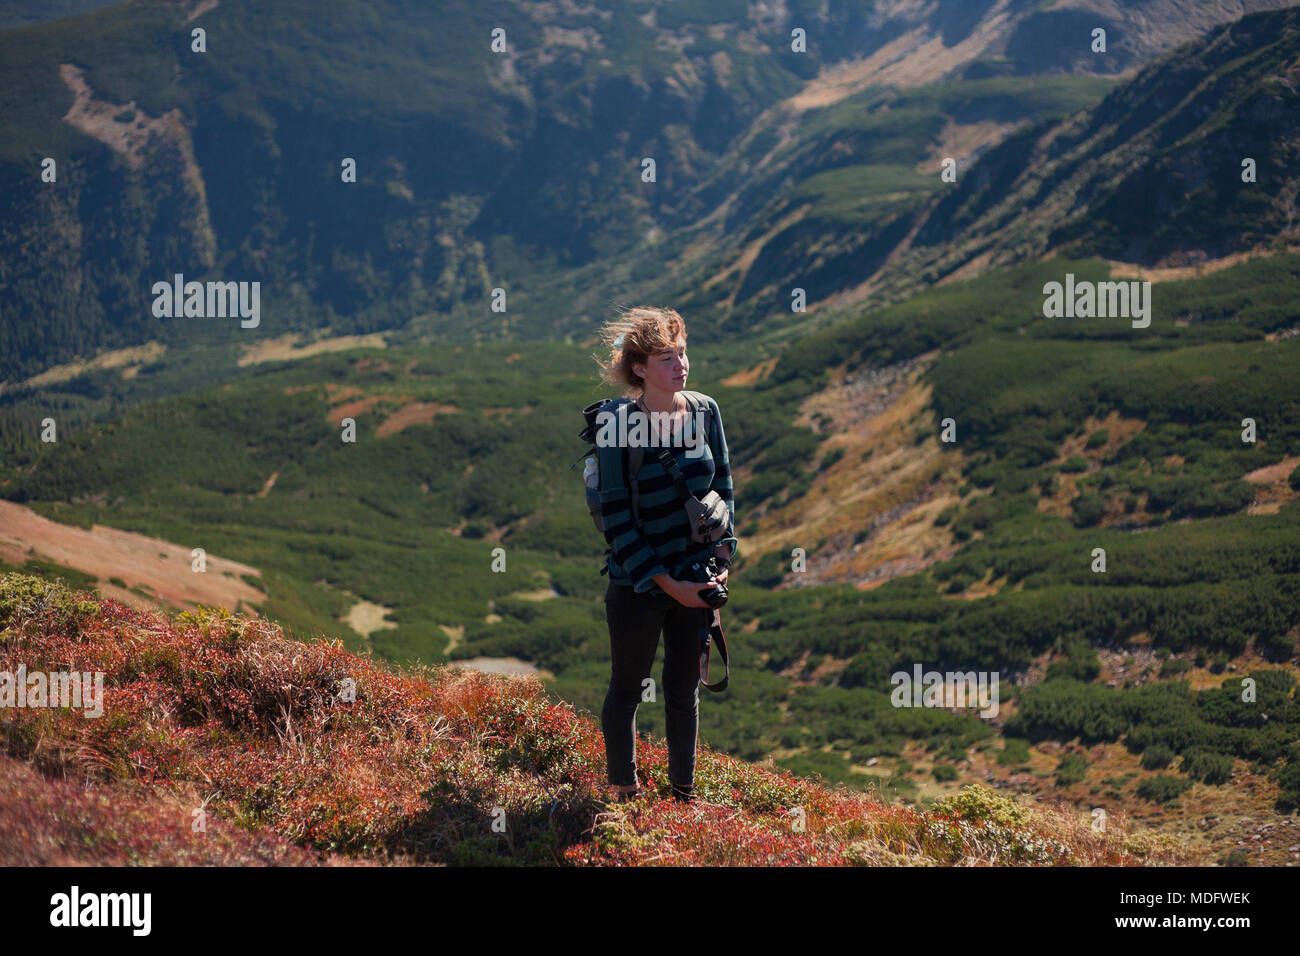 Woman standing on mountain slope looking at view, Ukraine Stock Photo